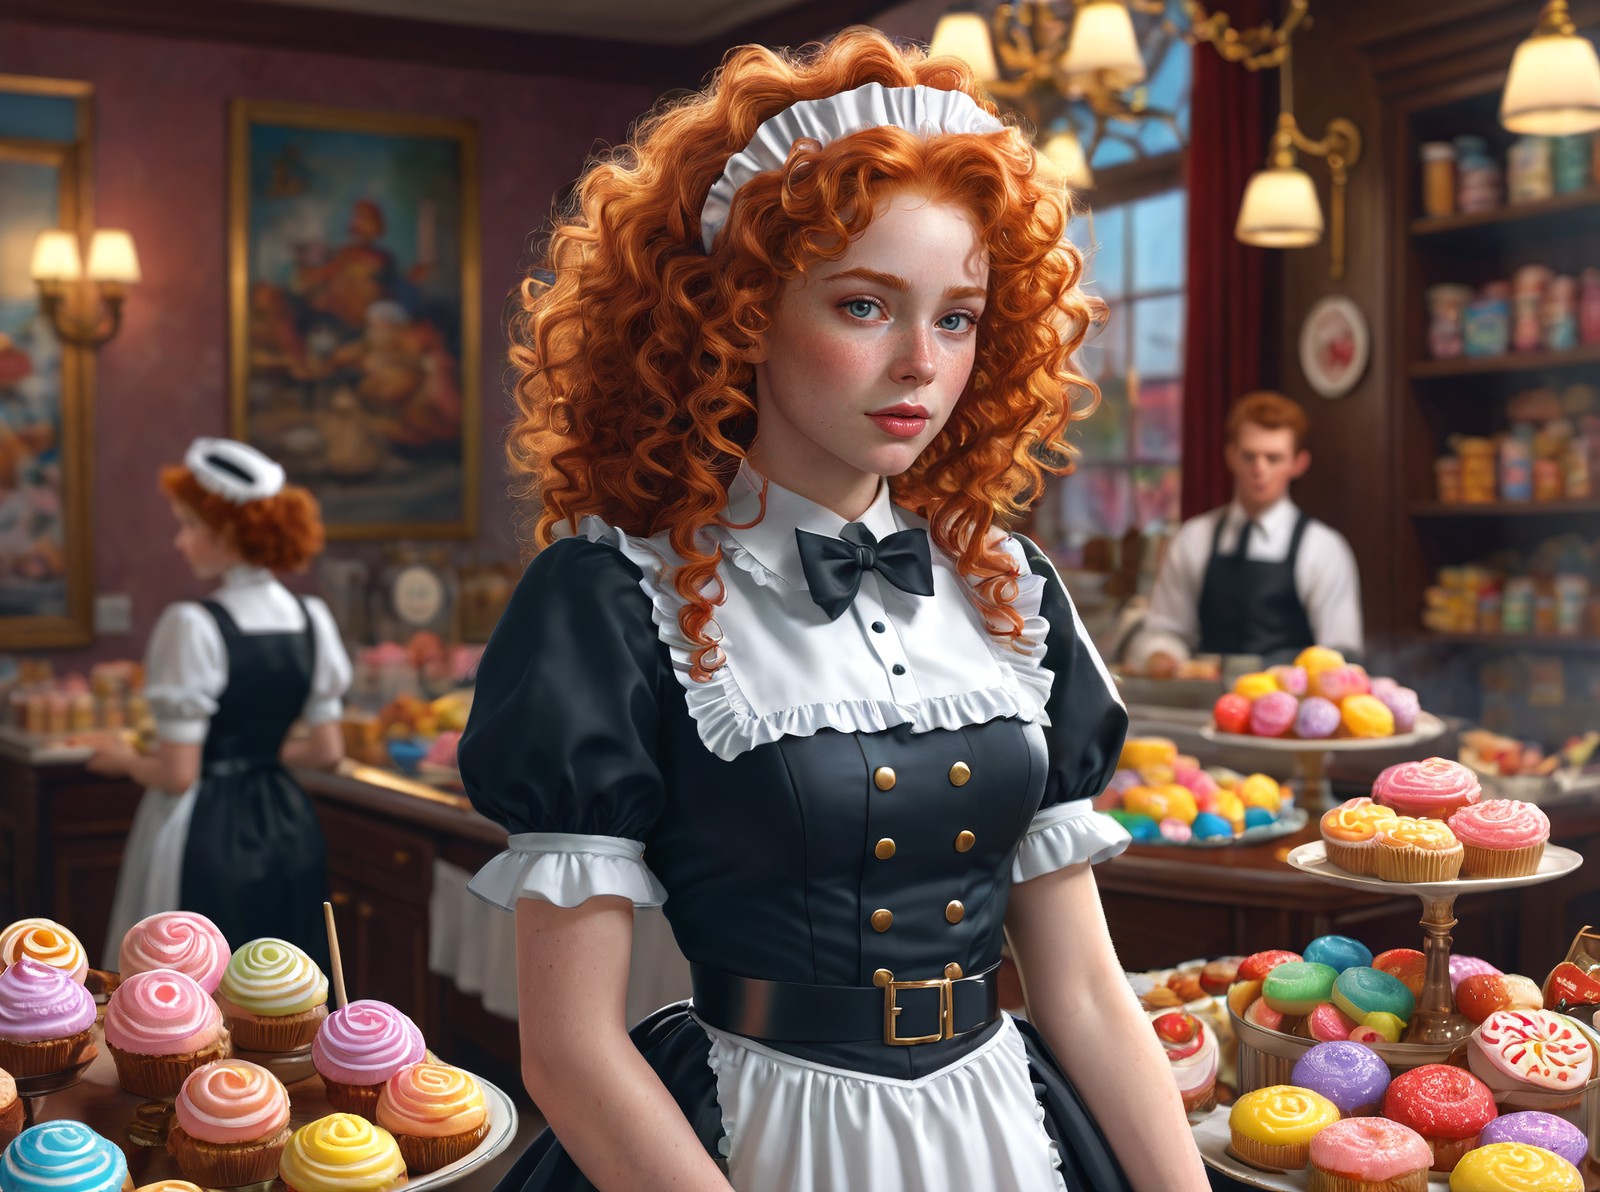 a female maid secret police,Curly Frizzy Hair,Redhead,arms behind back,In the Candied Wonderland of Everlasting Sweets,ele...